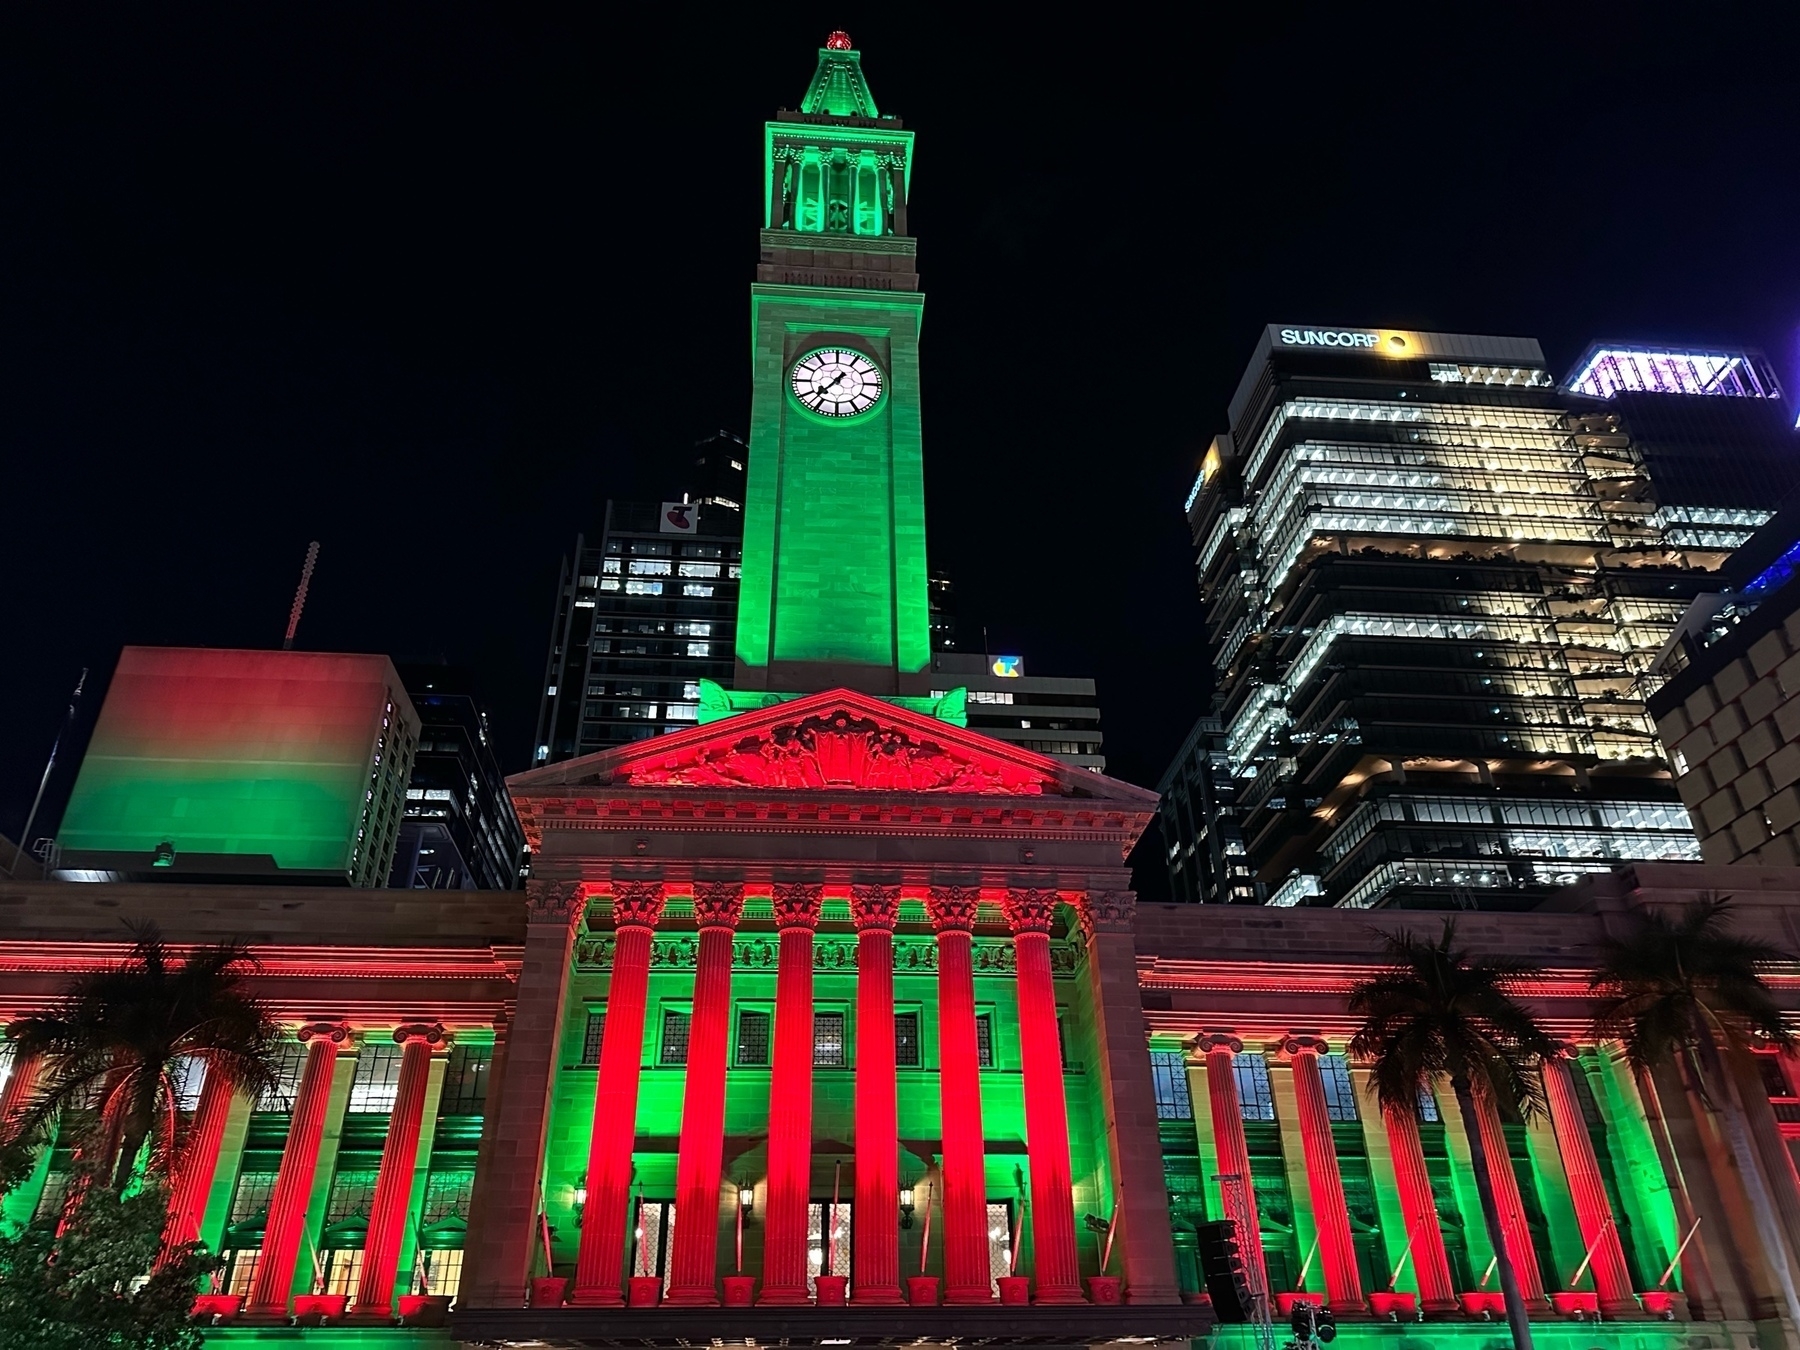 Brisbane City lit in red and green lighting. The front columns are all red with the portico behind in green. Clock tower is all green.